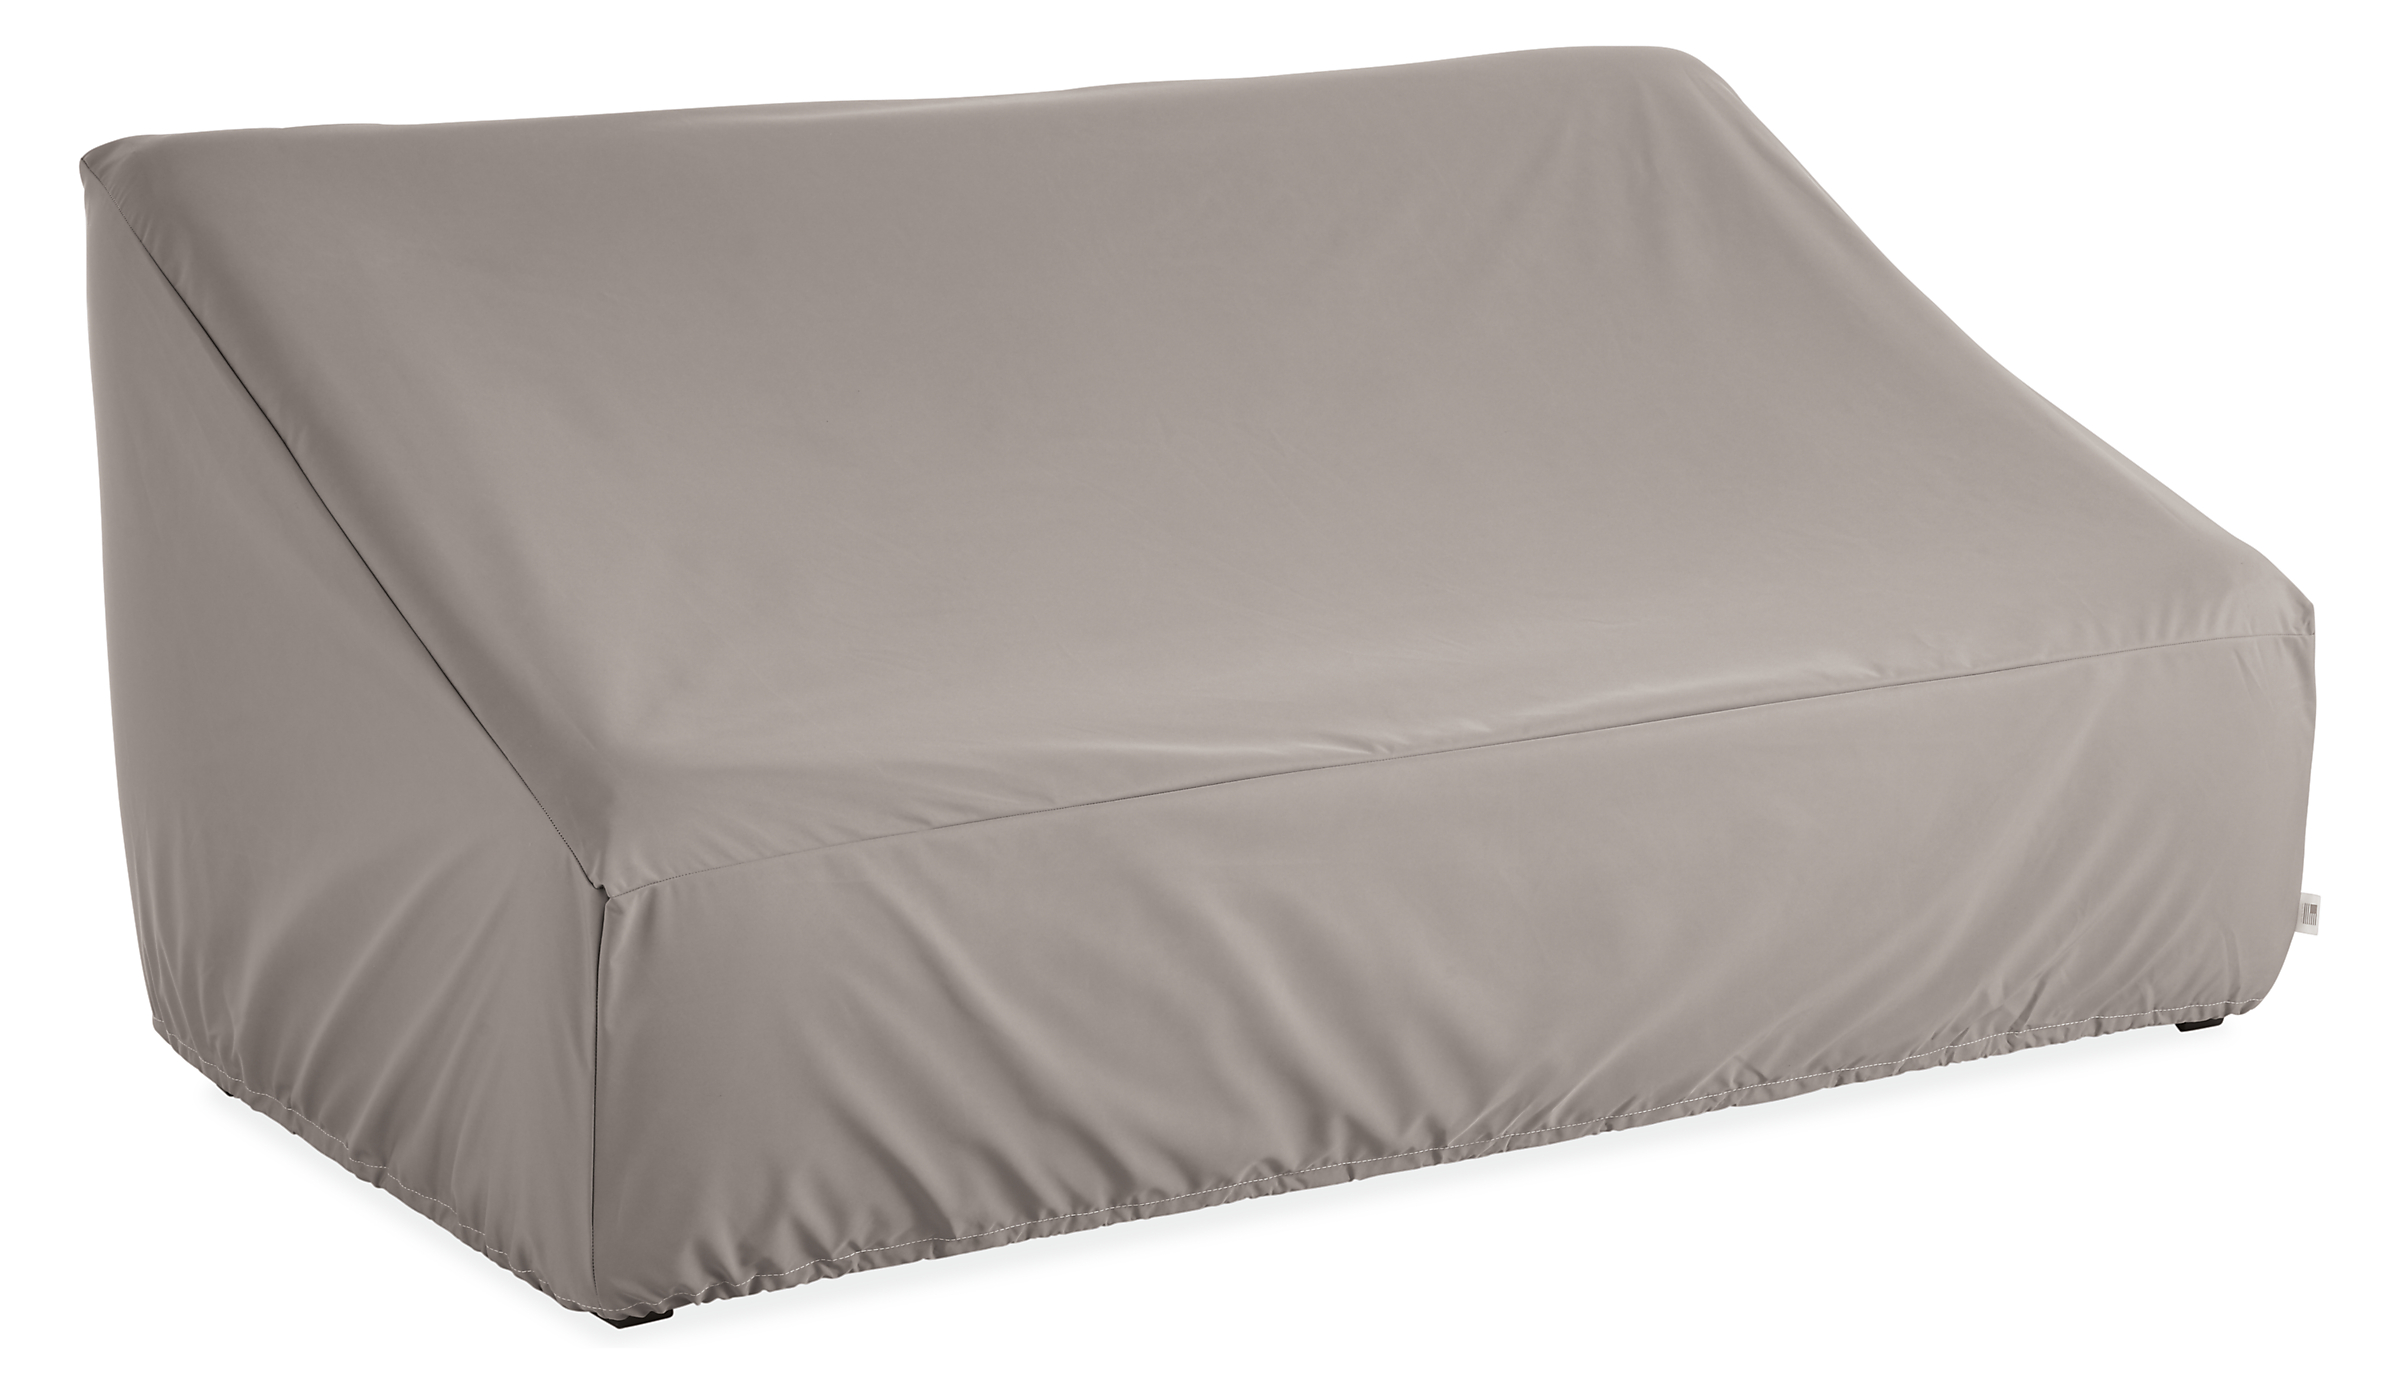 Outdoor Cover for Sofa 71w 35d 29h with Drawstring